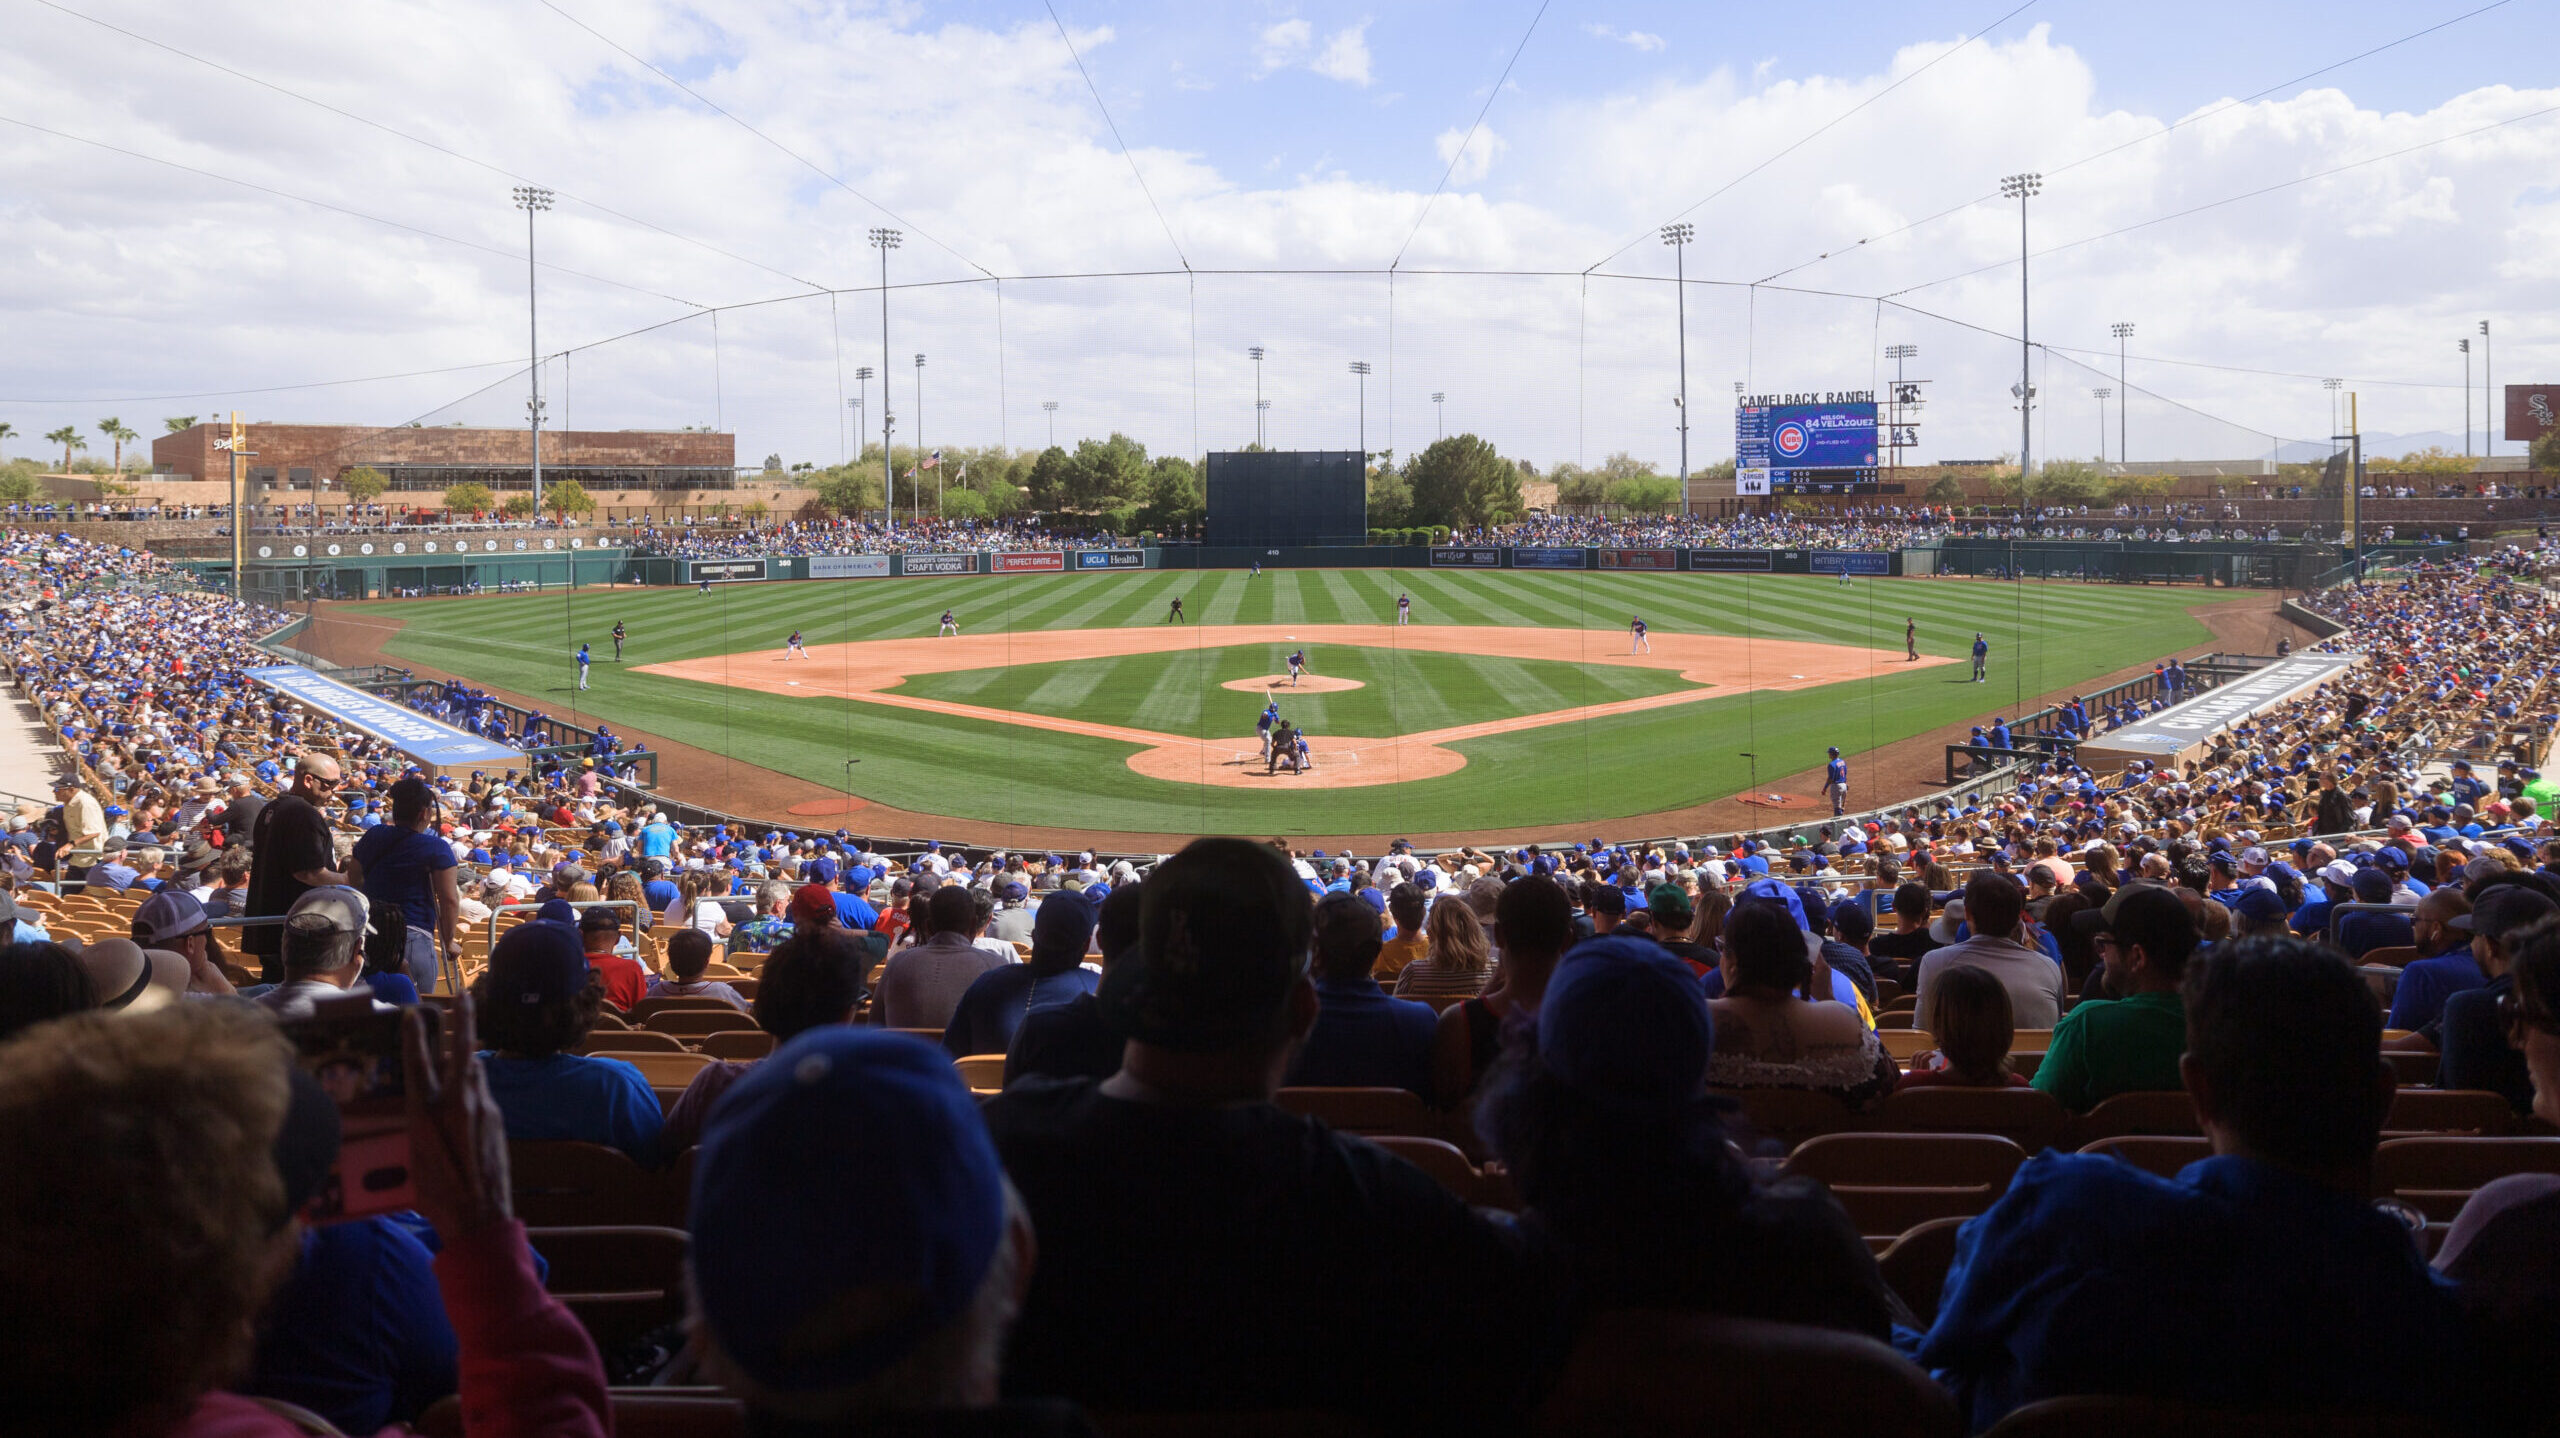 Fans fill Camelback Ranch during the MLB Spring Training baseball game between the Chicago Cubs and...